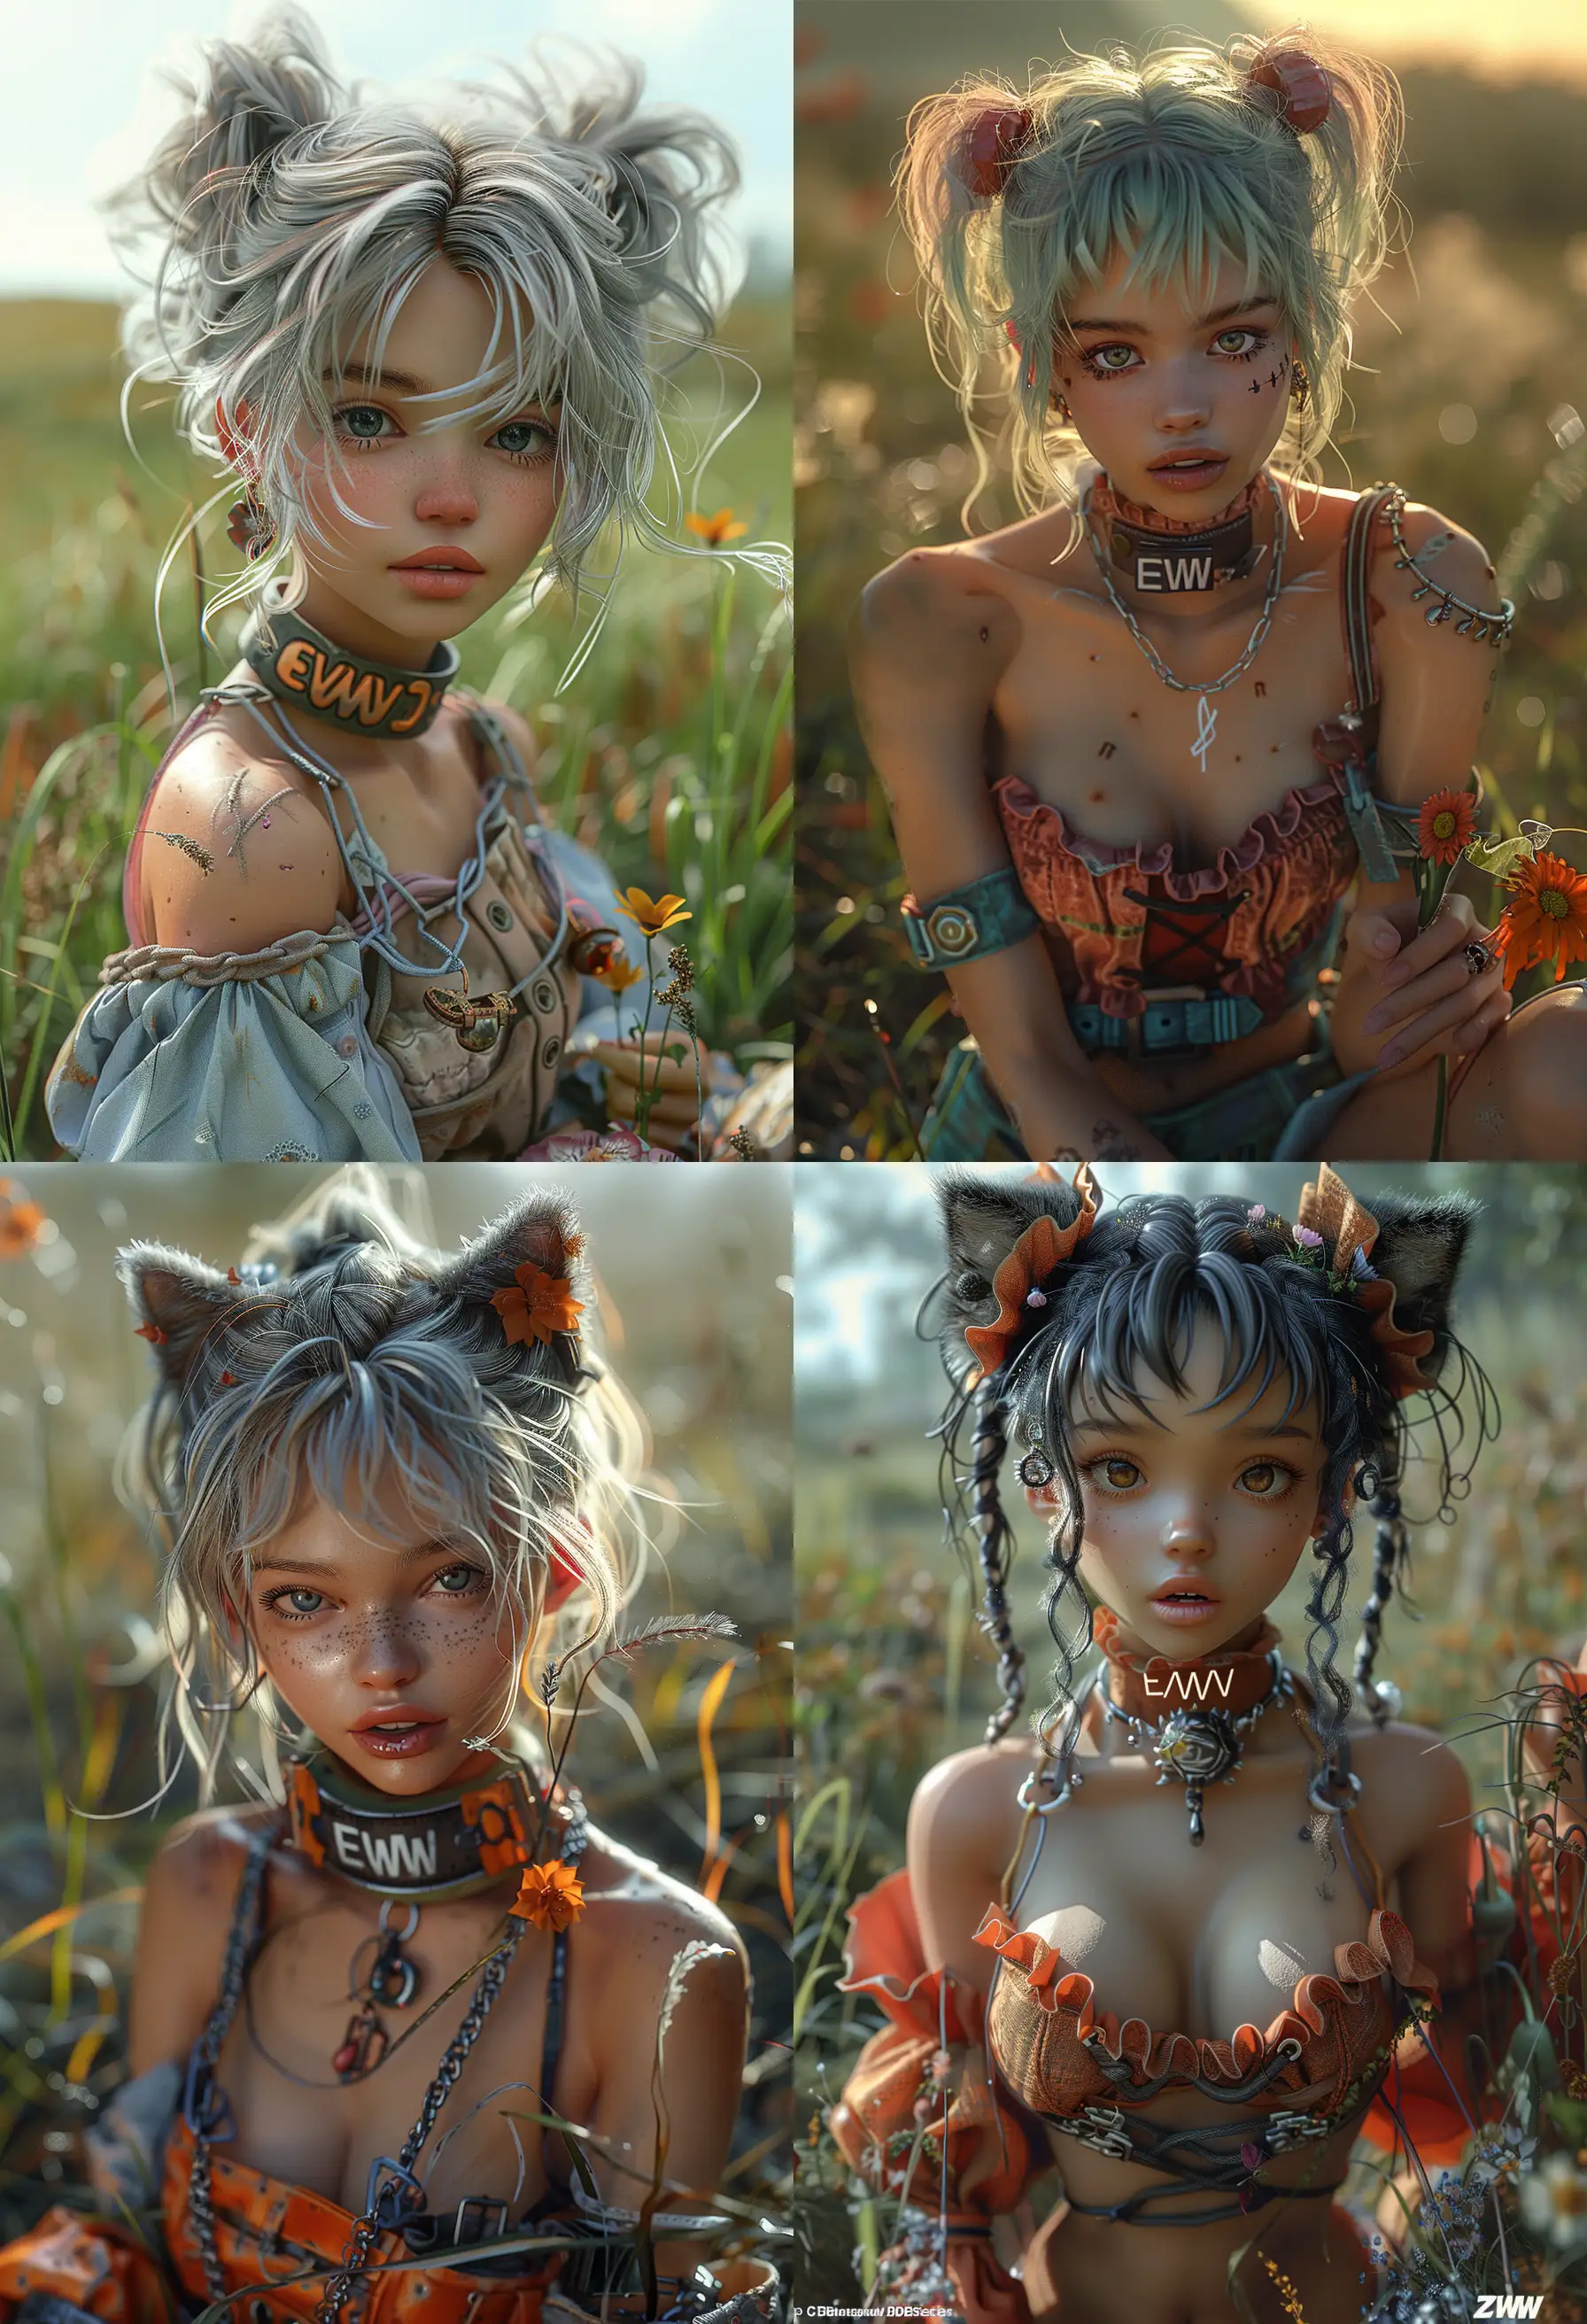 Adorable-Anime-Character-with-EWW-Collar-in-Lush-Field-Holding-a-Flower-Ultra-Realistic-CGI-Fine-Art